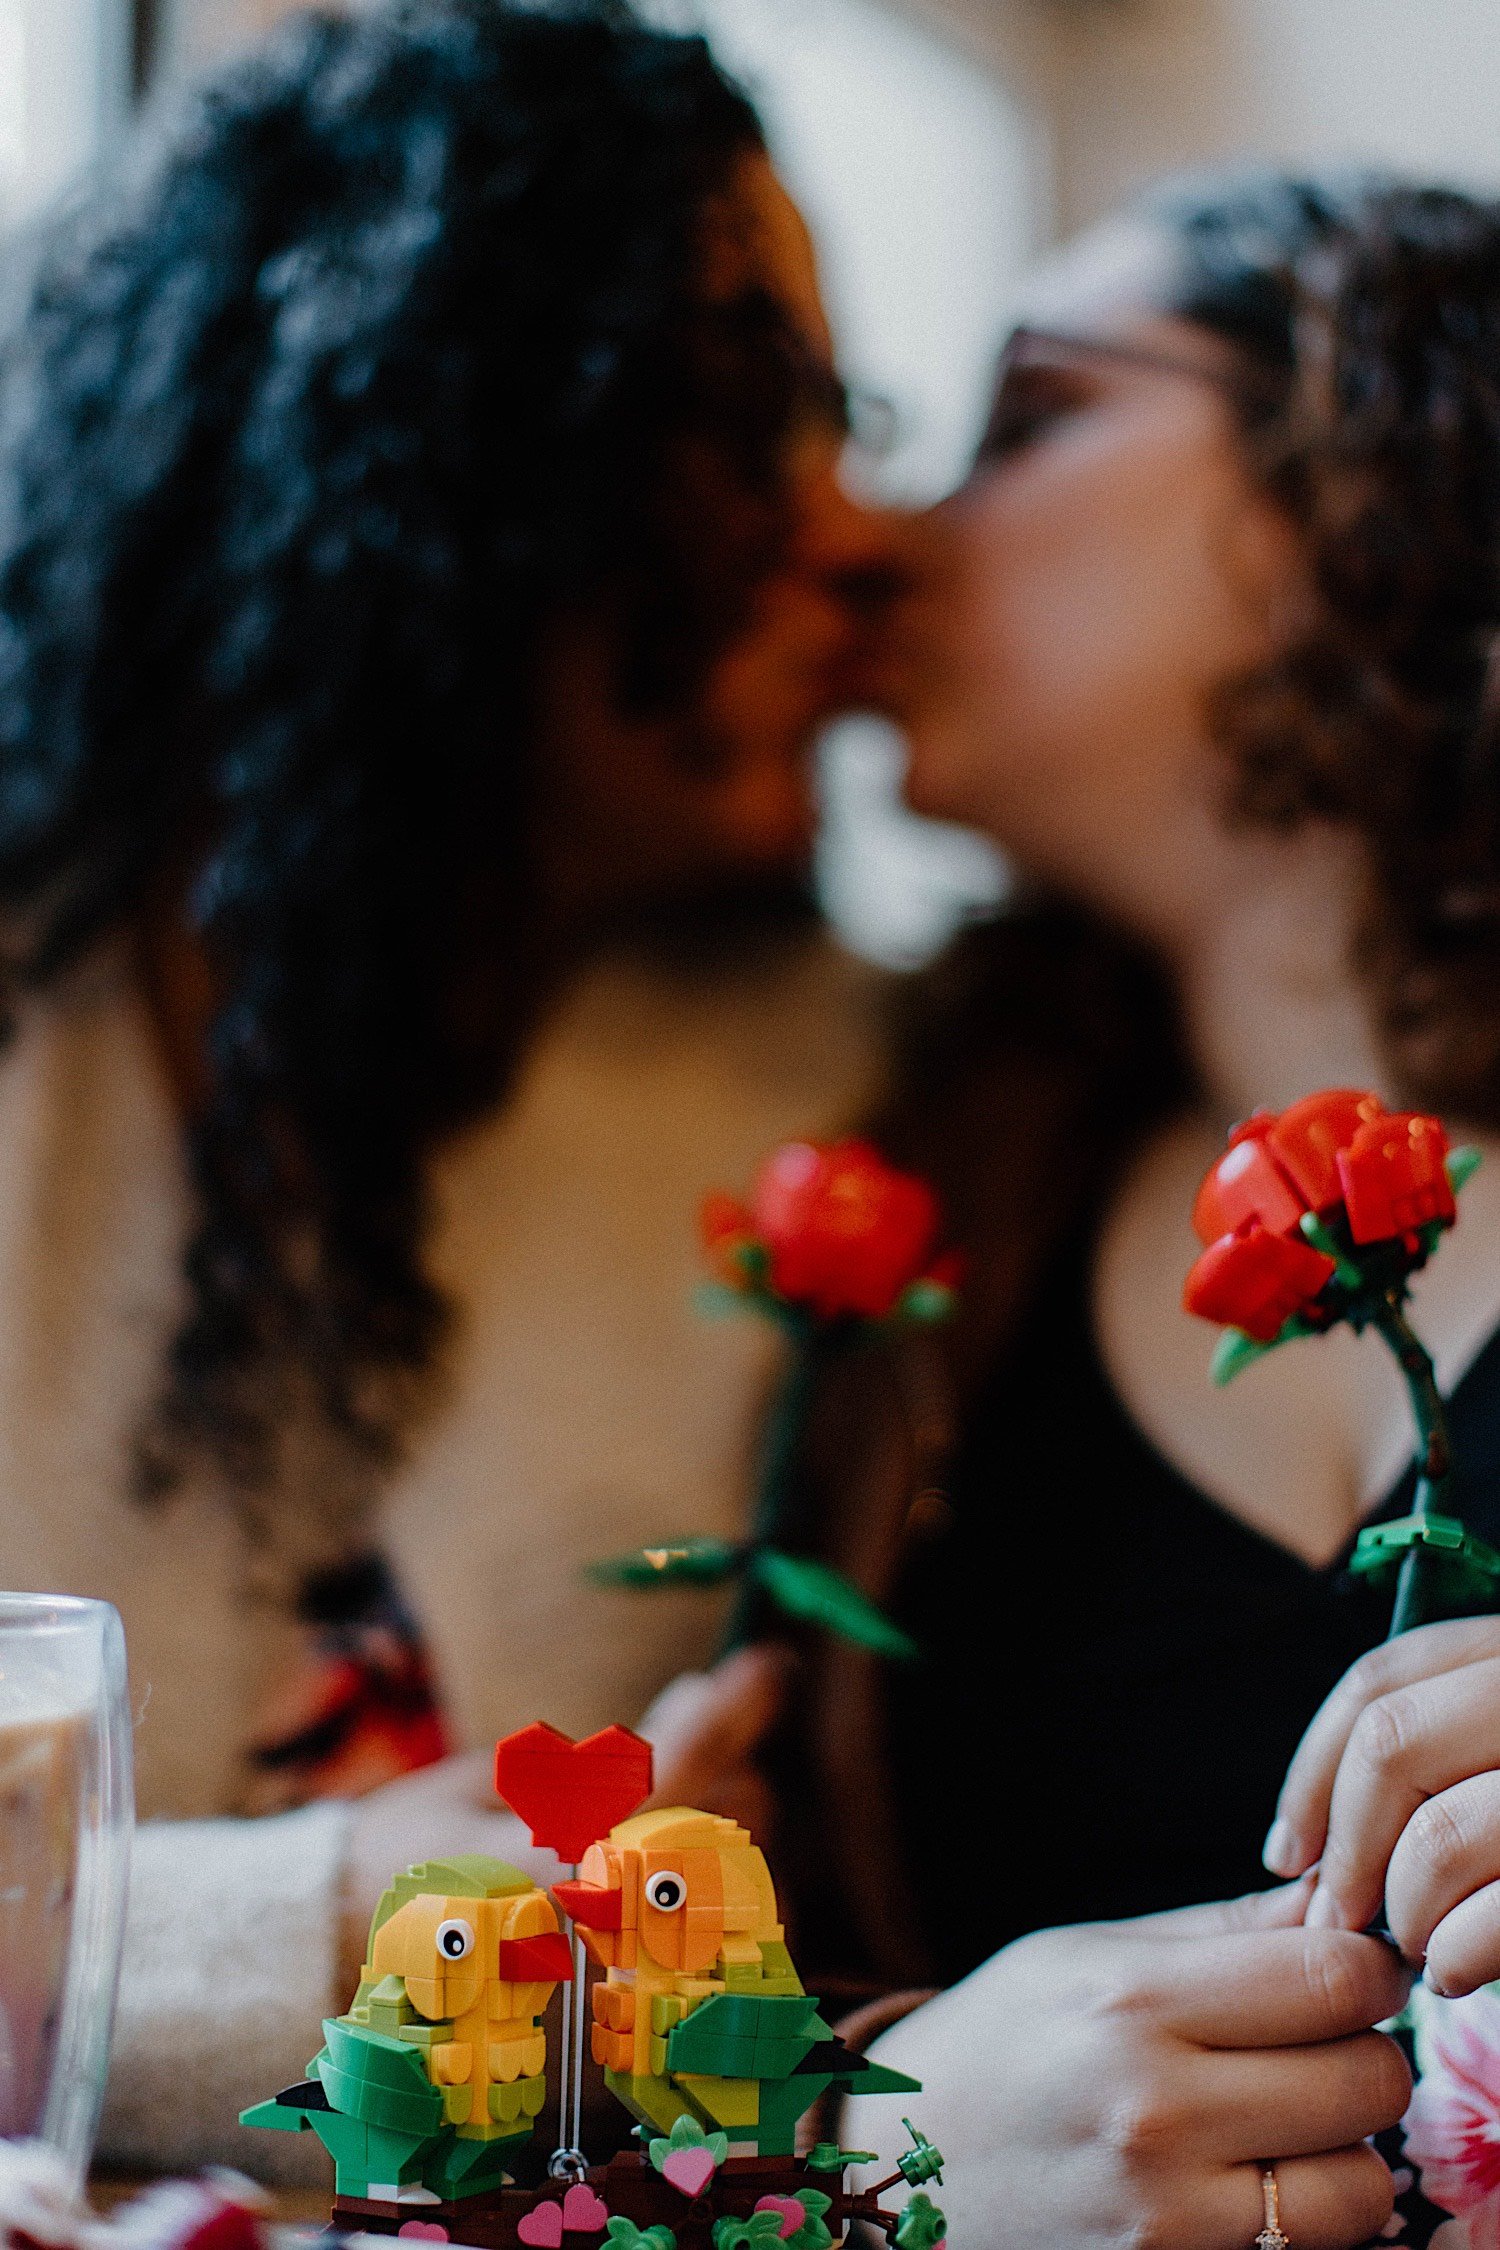 Couple kiss while holding Lego roses as Lego parrots kiss in front of them